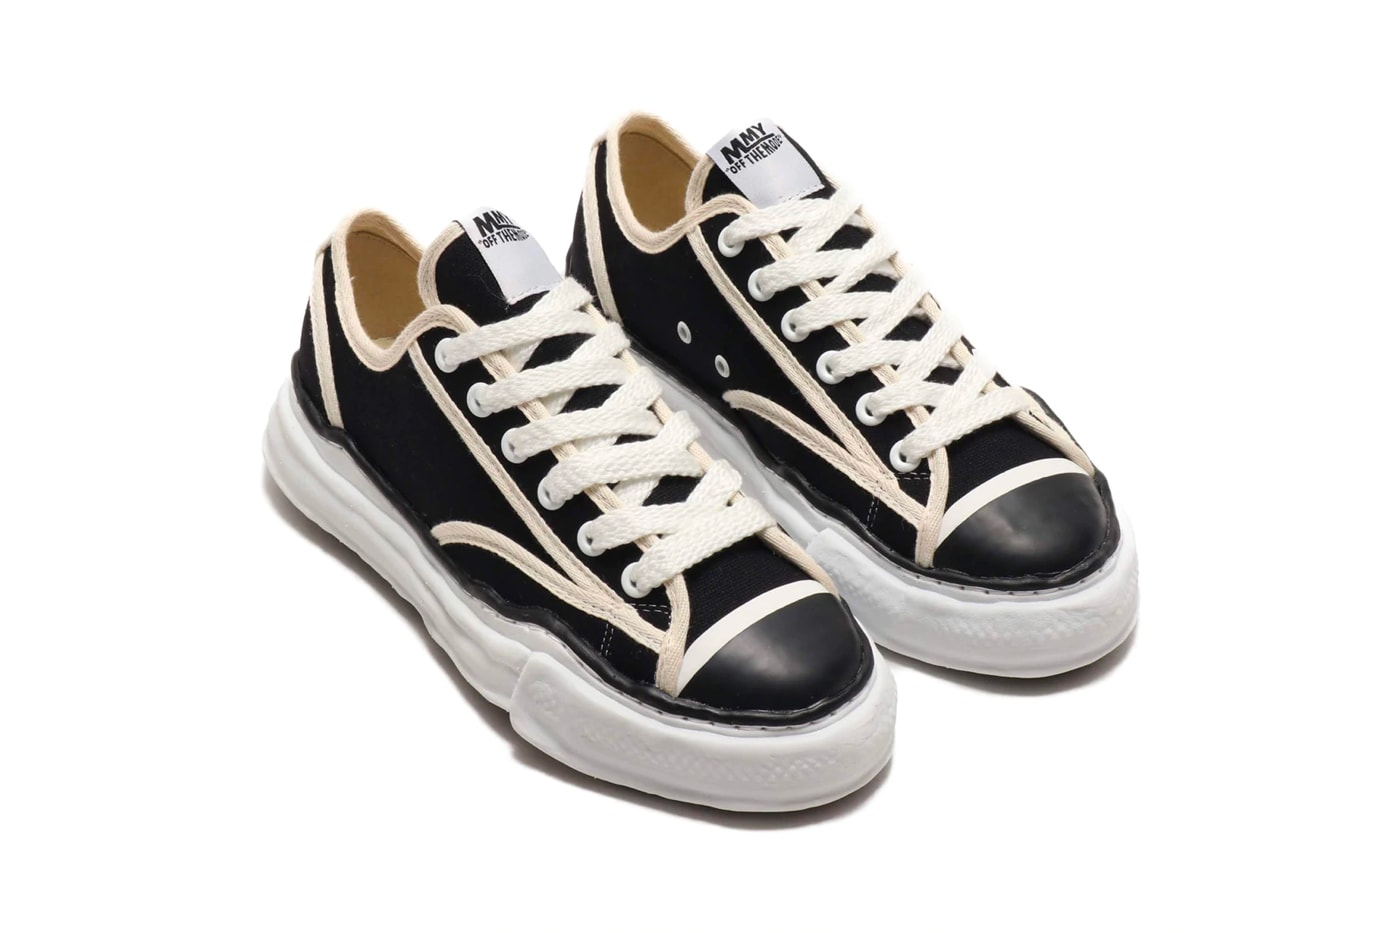 Maison Mihara Yasuhiro OG Sole Sneakers White black multi color sneakers shoes footwear kicks runners trainers original chunky thick melting canvas piping japanese spring summer 2020